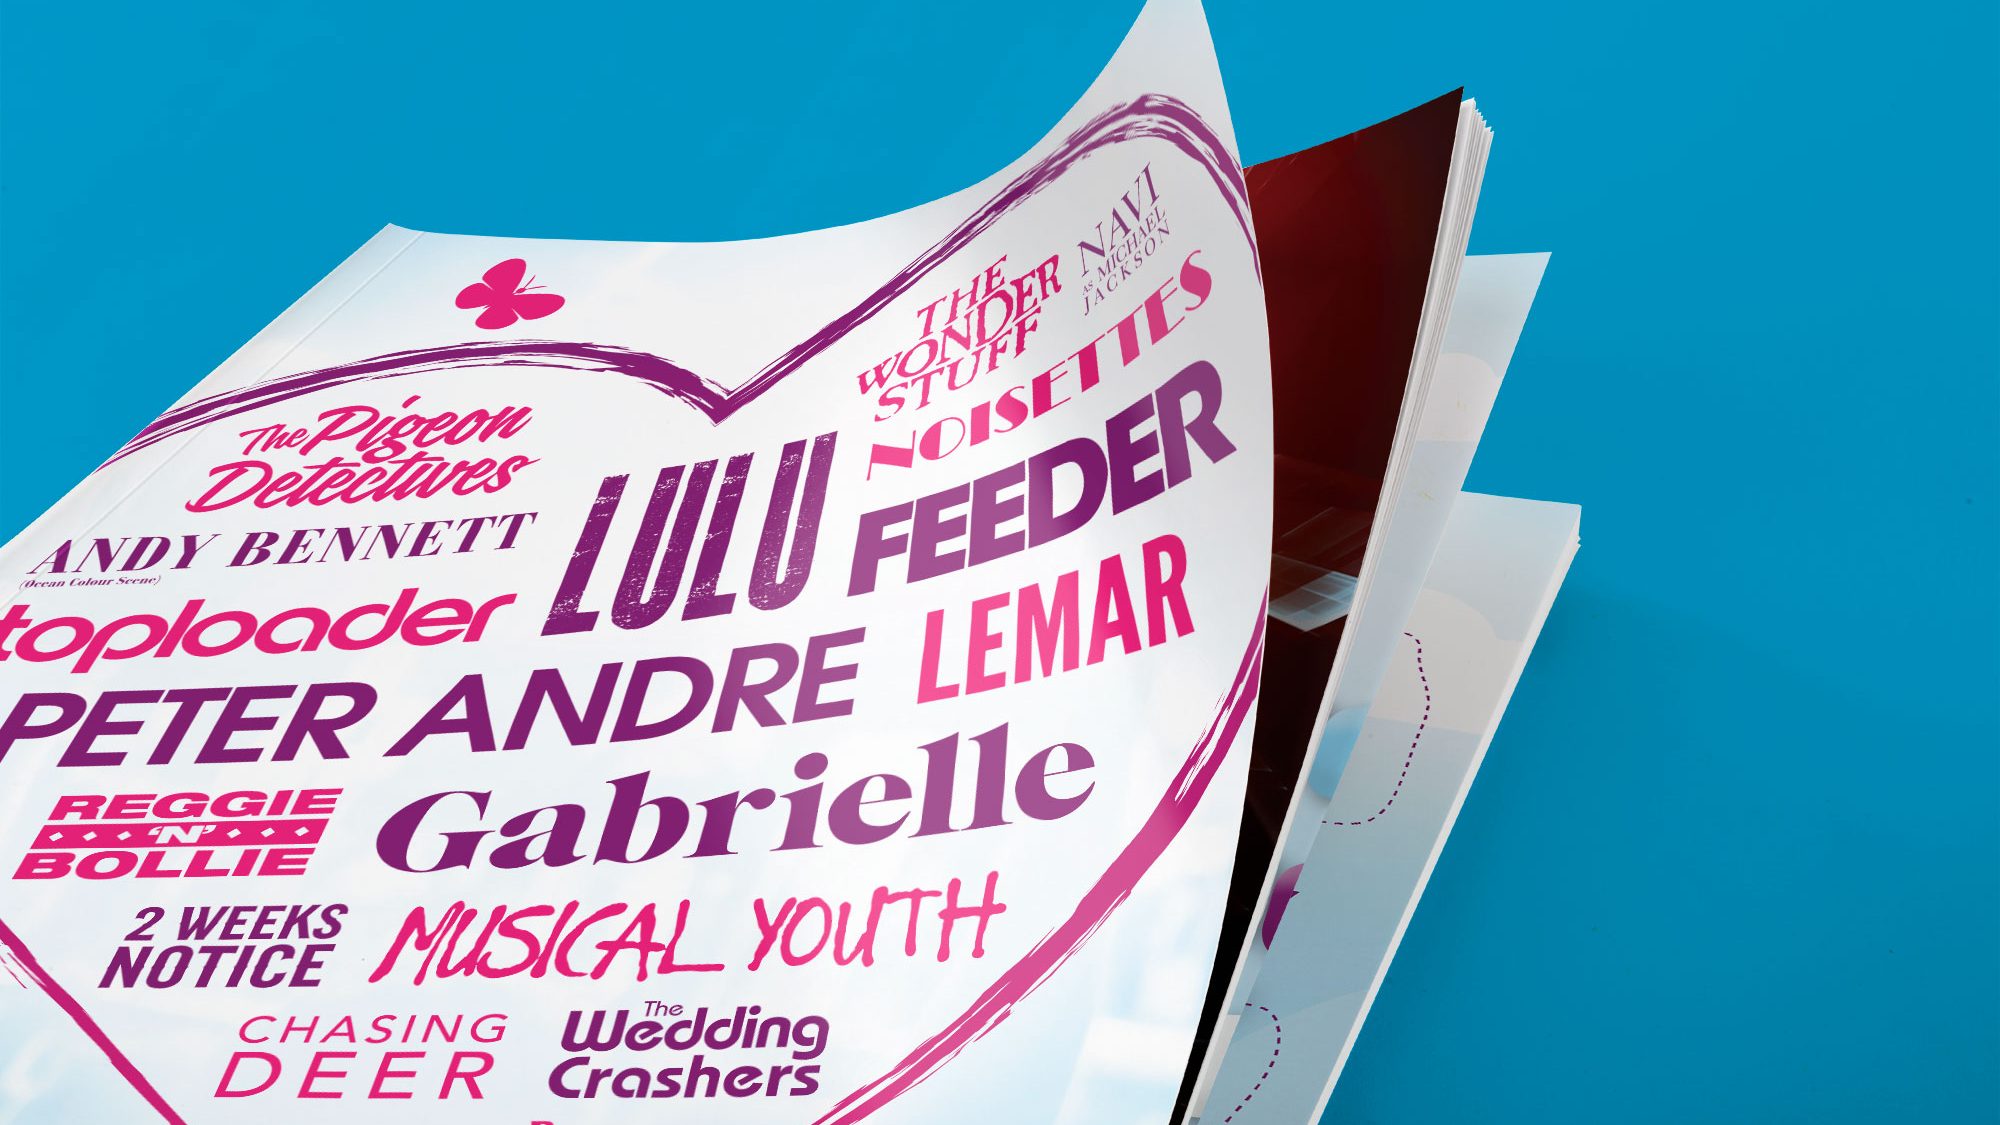 Brochure design printing for Solihull Summerfest Music festival with Toploader Lulu and Feeder